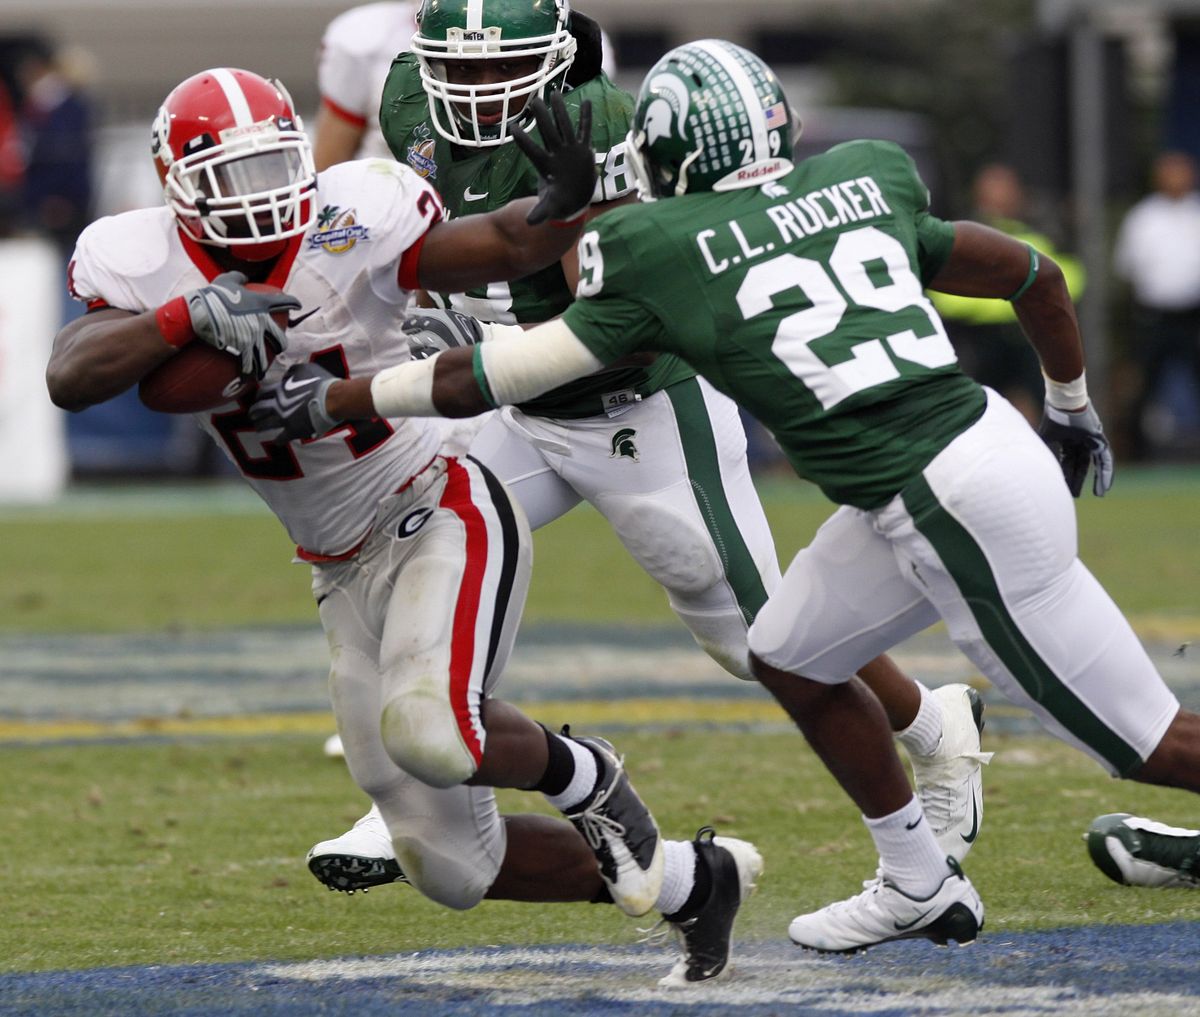 Georgia running back Knowshon Moreno, left, runs for yardage as Michigan State cornerback Chris L. Rucker  gives pursuit.   (Associated Press / The Spokesman-Review)